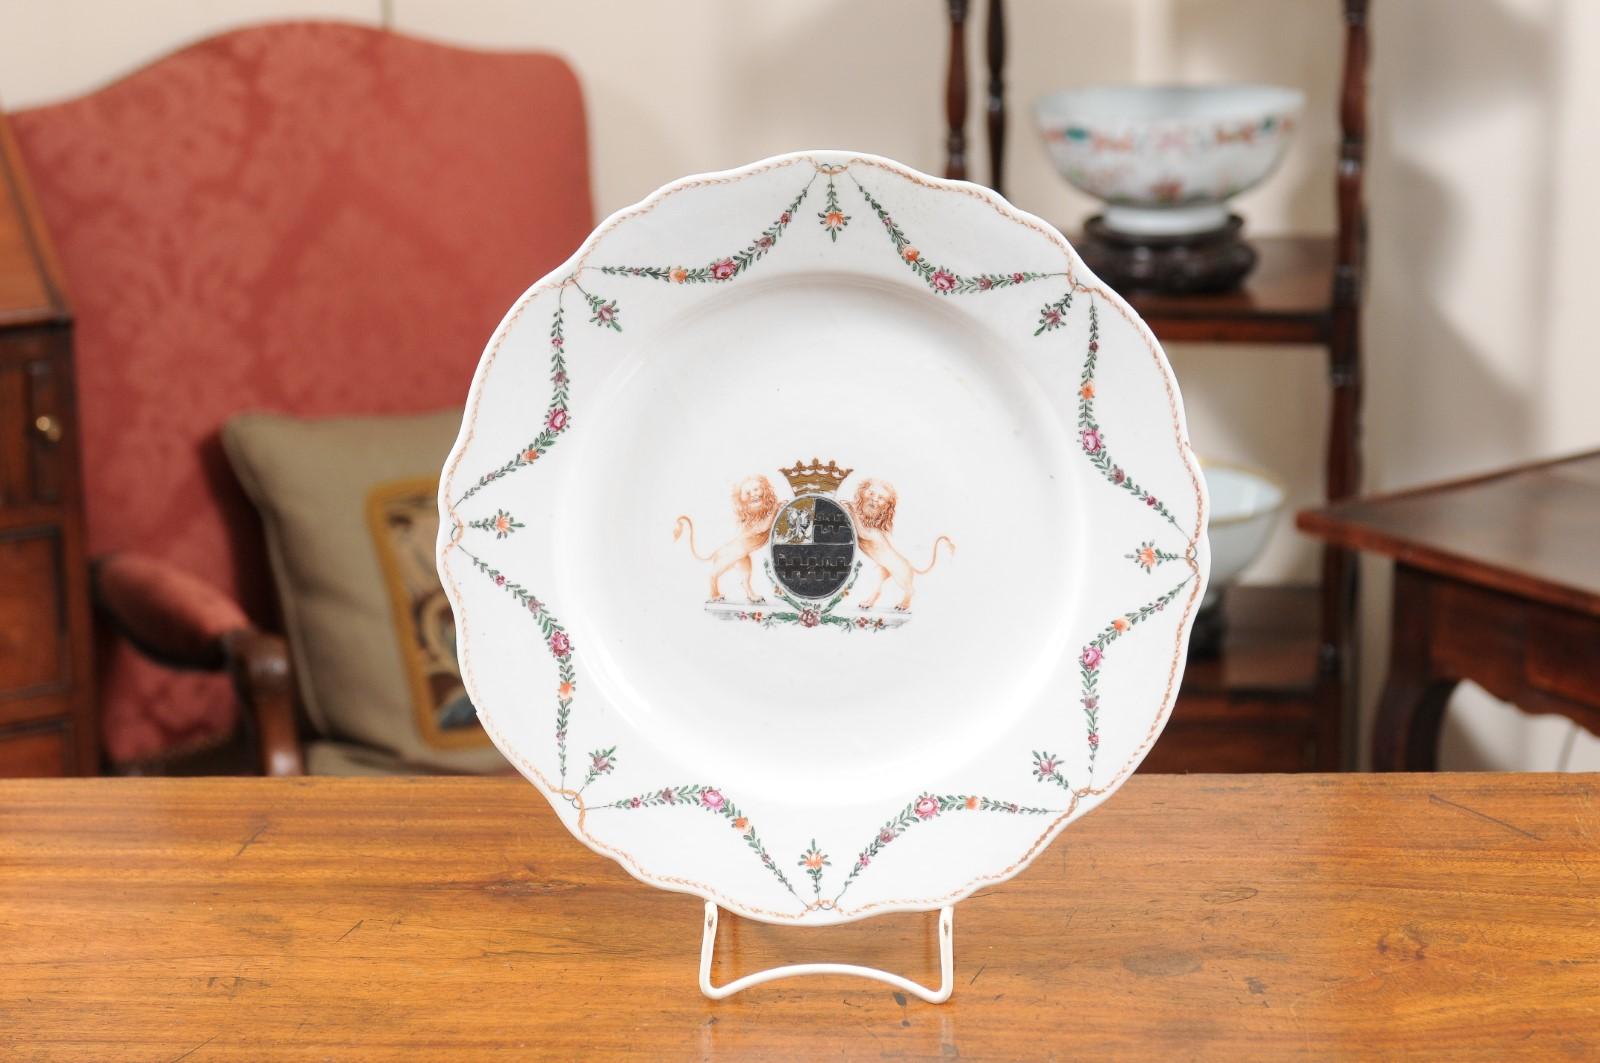 18th Century Chinese Export Porcelain Cake Plate / Charger with Armorial Crest In Good Condition For Sale In Atlanta, GA